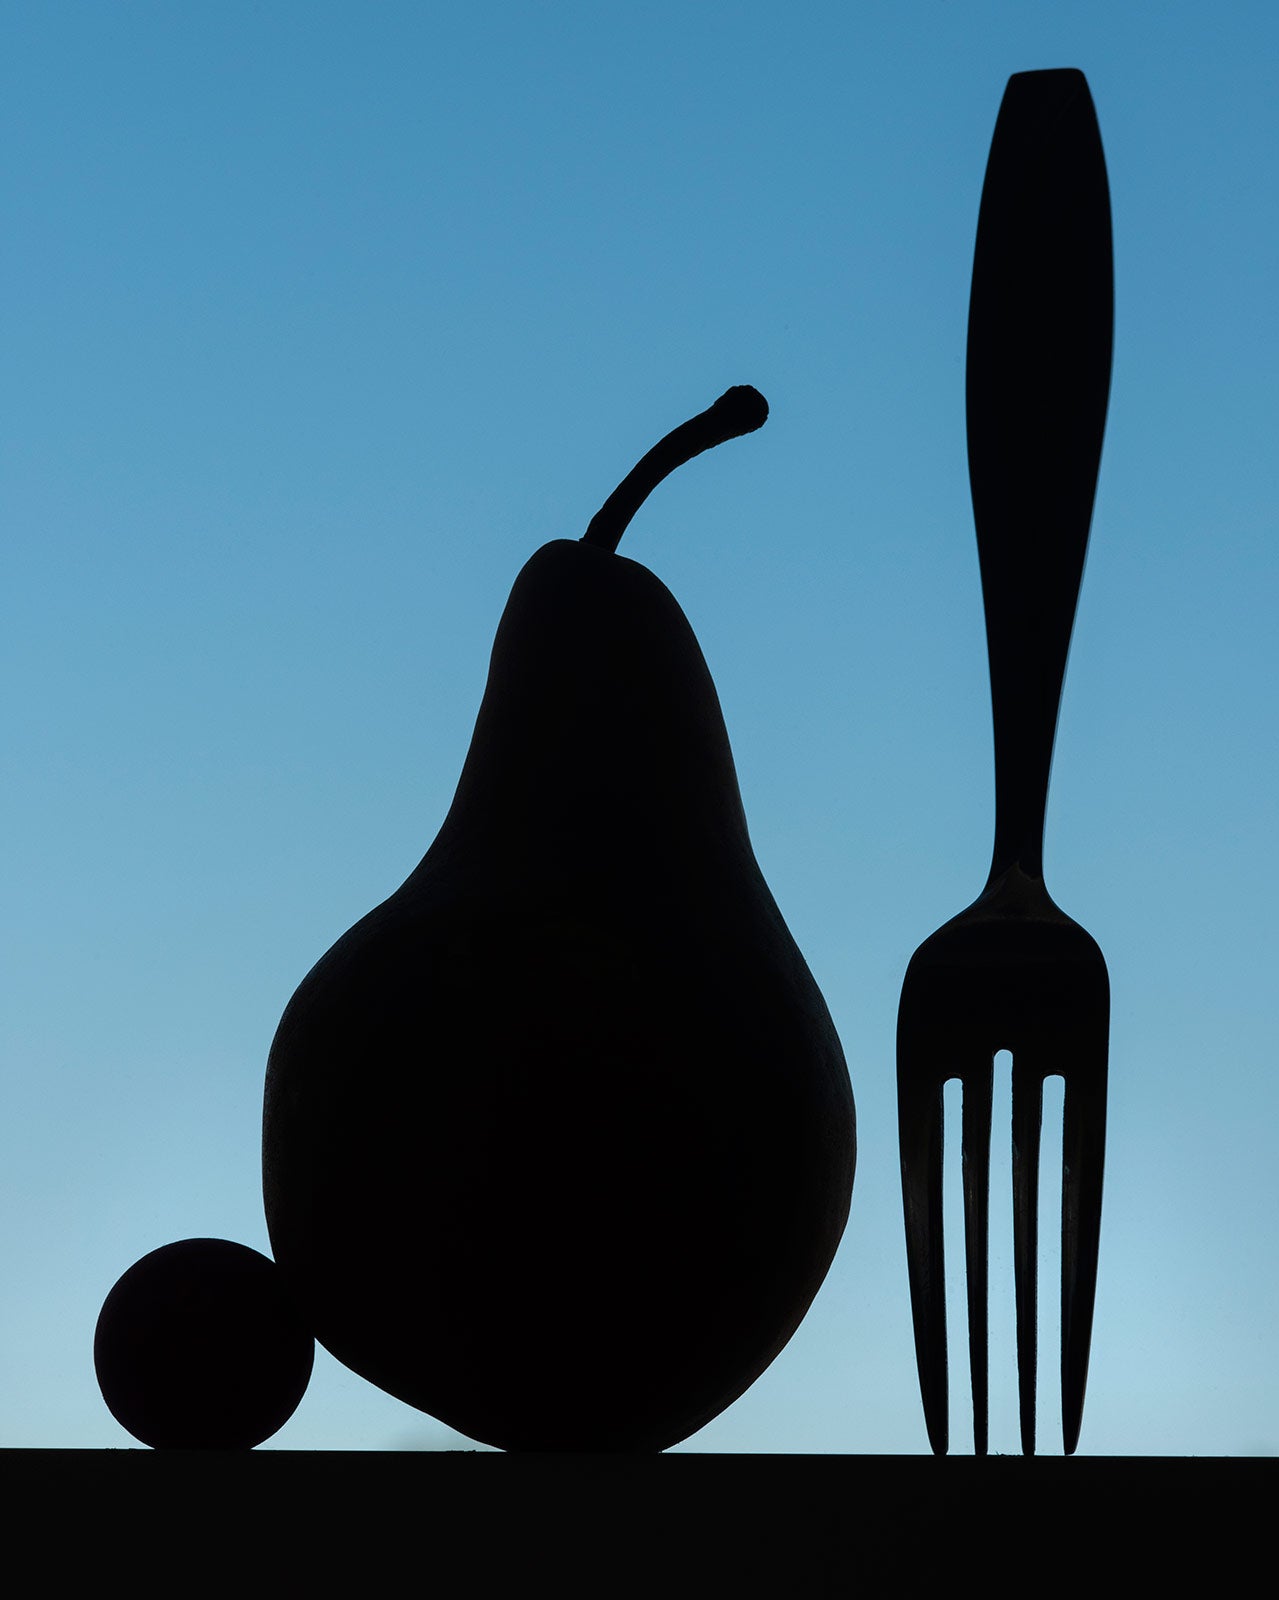 Jorum Studio Pentimento Visual Journey Sergiy Barchuk photograph of pear, plum and fork silhouette in surreal style with blue background